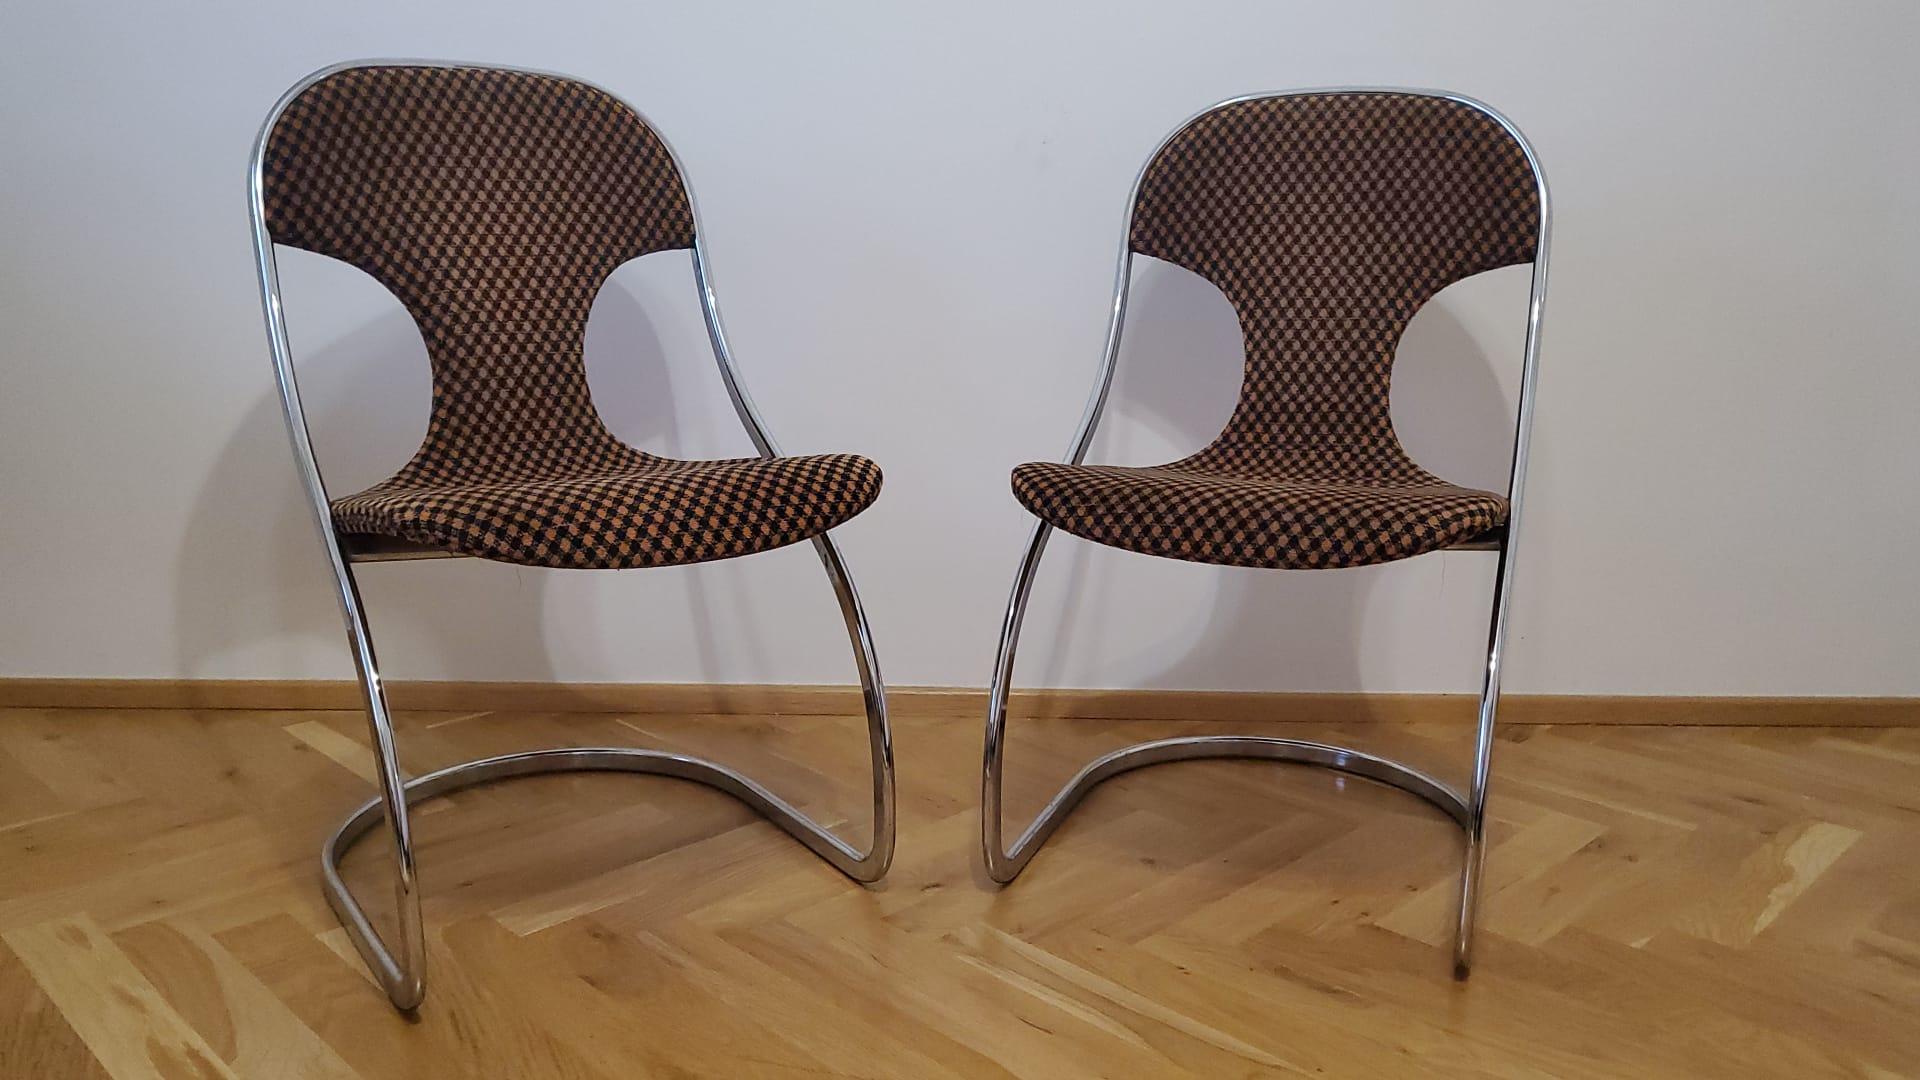 Late 20th Century Pair of Midcentury Rare Design Chairs, Italy, 1970s For Sale